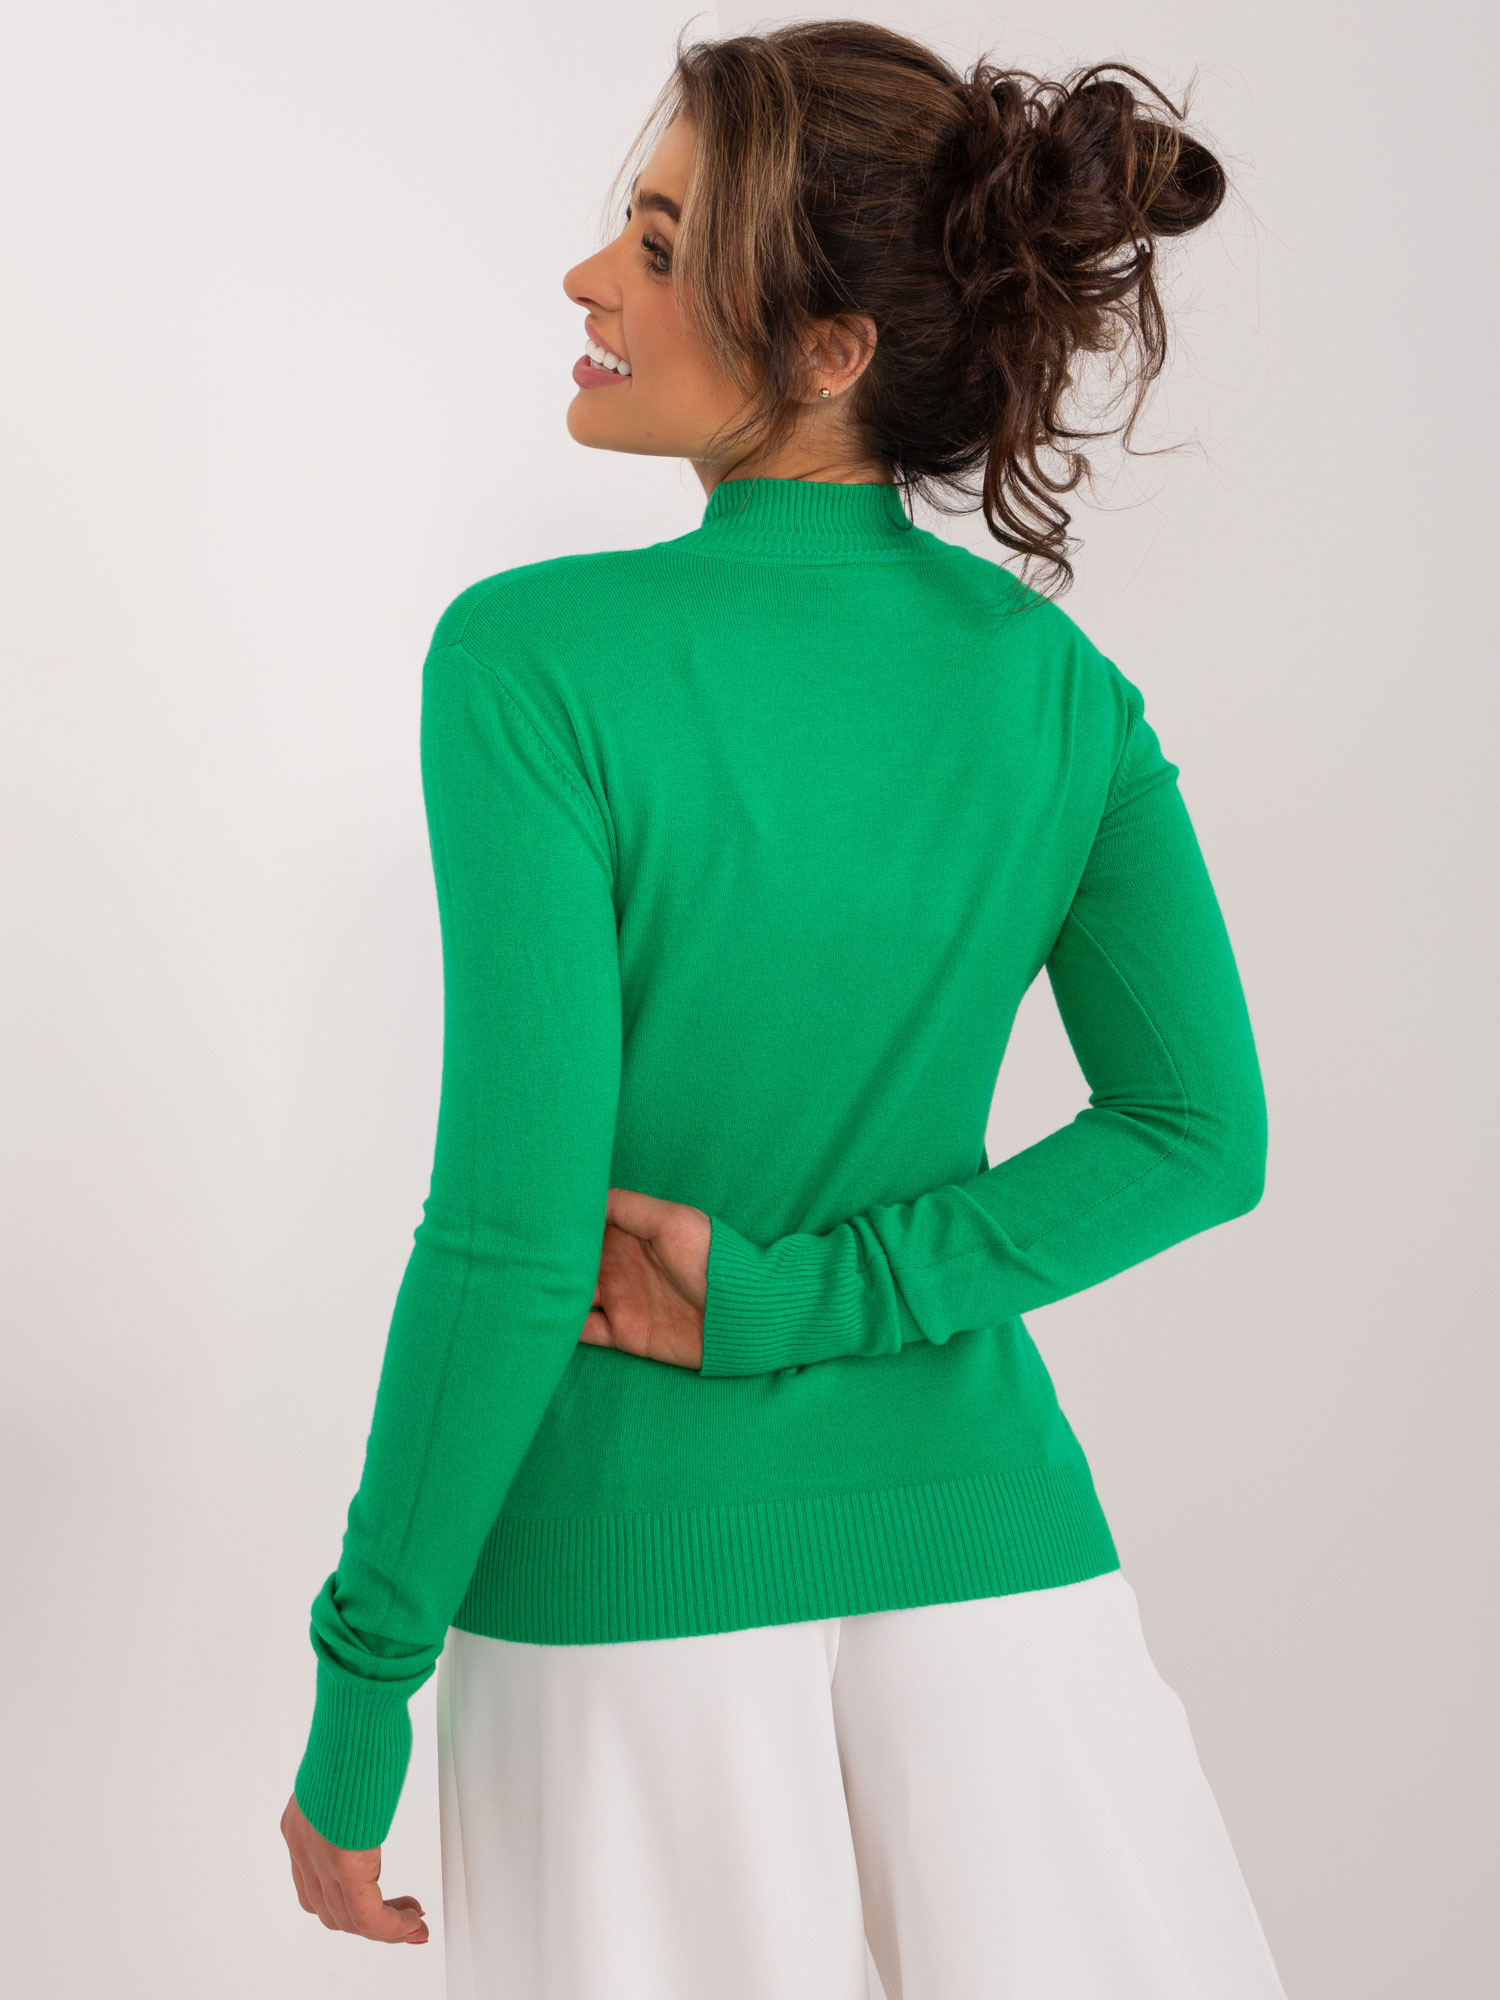 Green fitted turtleneck sweater